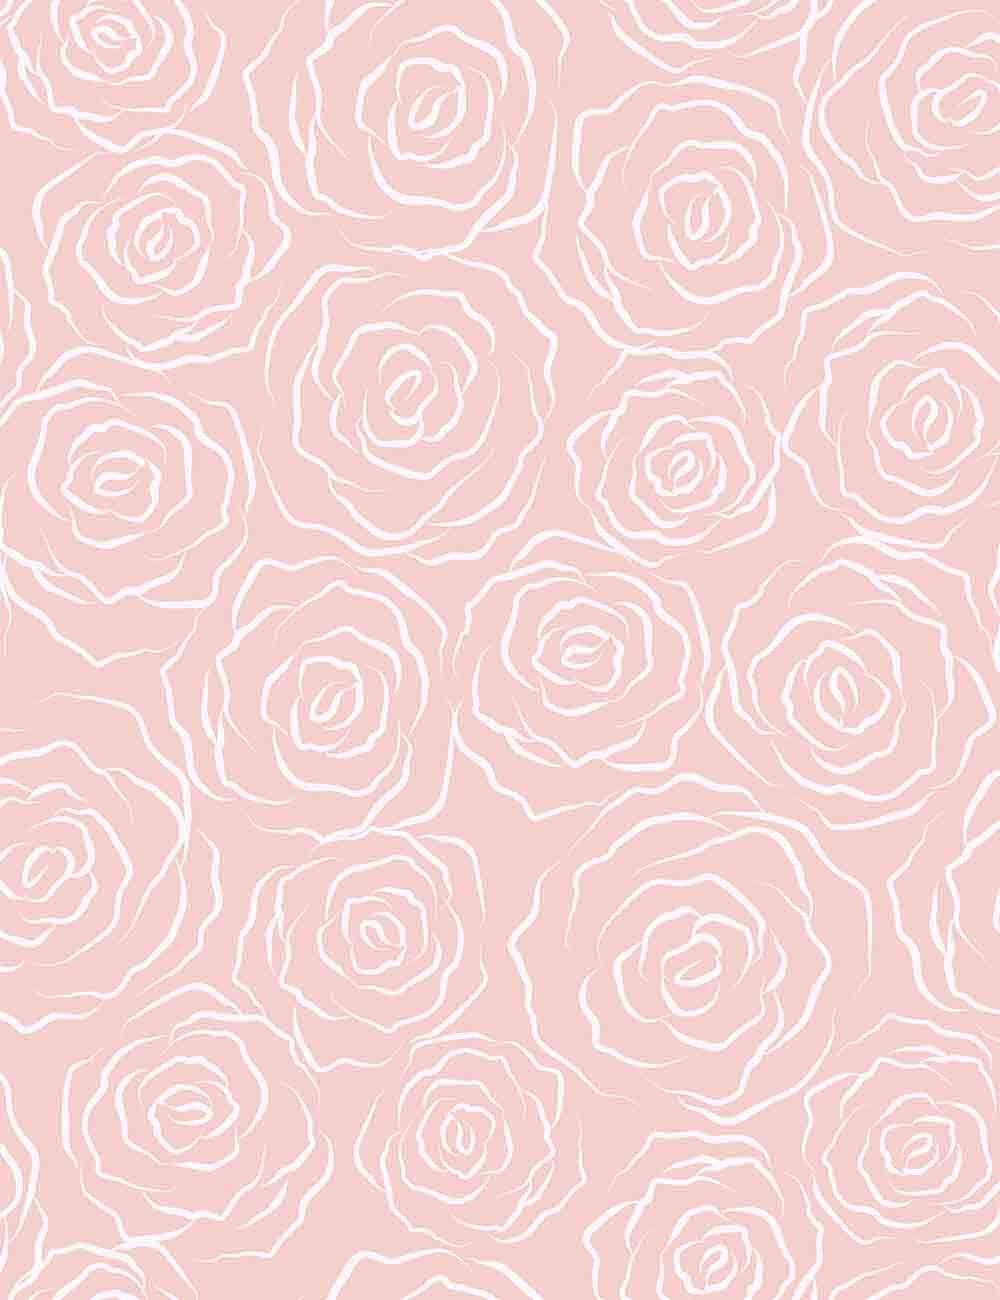 Damask Painted White Rose On Pink Paper Wall Backdrop For Photography Shopbackdrop